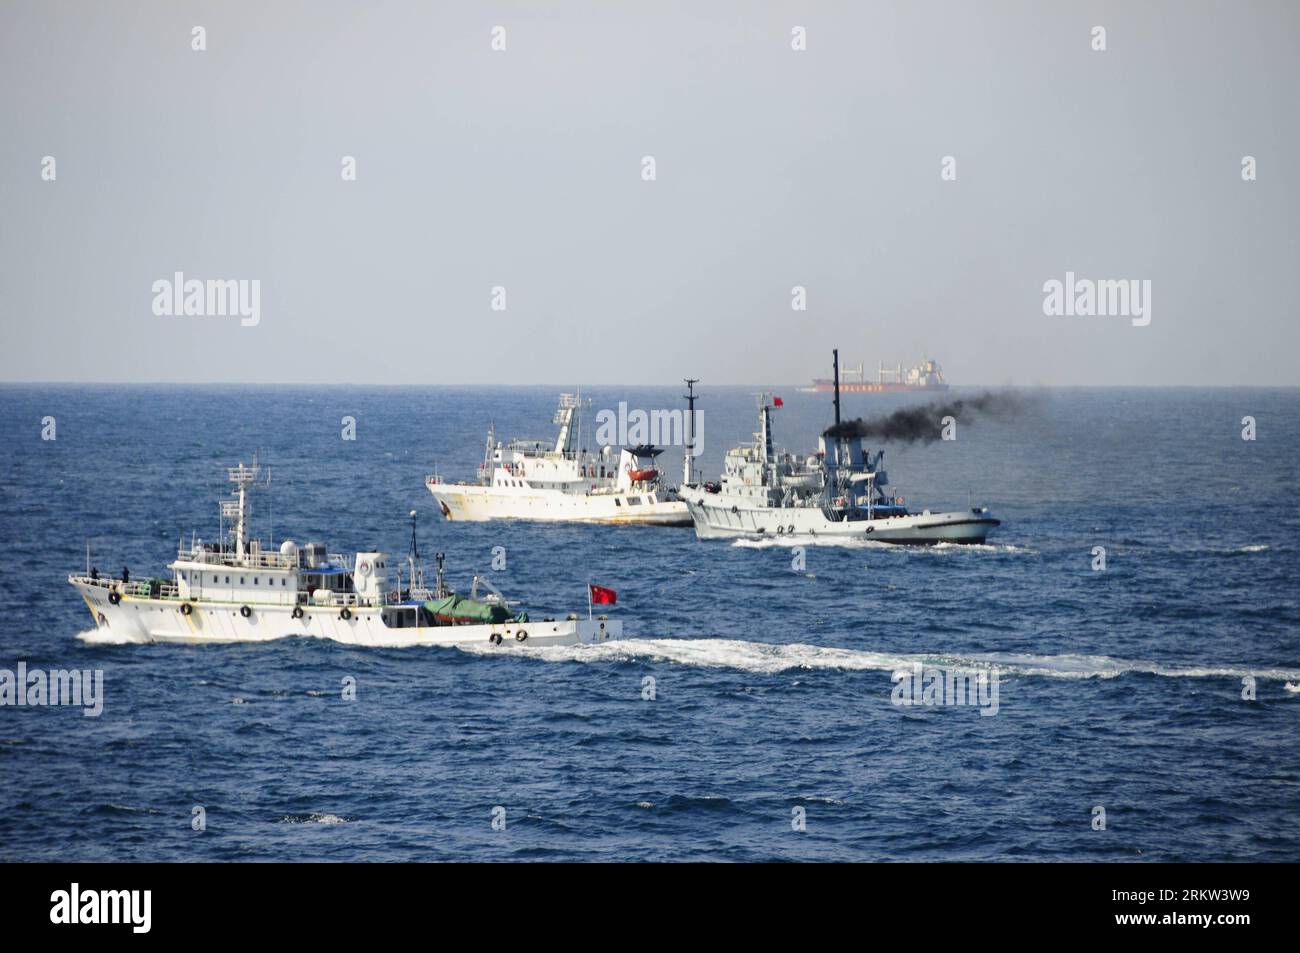 Bildnummer: 58610678  Datum: 19.10.2012  Copyright: imago/Xinhua (121019) -- EAST CHINA SEA, Oct. 19, 2012 (Xinhua) -- Photo taken on Oct. 19, 2012 shows the scene of a joint exercise on the East China Sea. China s Civilian maritime authorities and the People s Liberation Army (PLA) Navy conducted the exercise in the East China Sea on Friday. A total of 11 vessels, eight aircraft and more than 1,000 personnel from the PLA Navy s Donghai Fleet, China s fishery administration and marine surveillance agency took part in the routine exercise, according to a statement from the fleet. (Xinhua/Sun Li Stock Photo